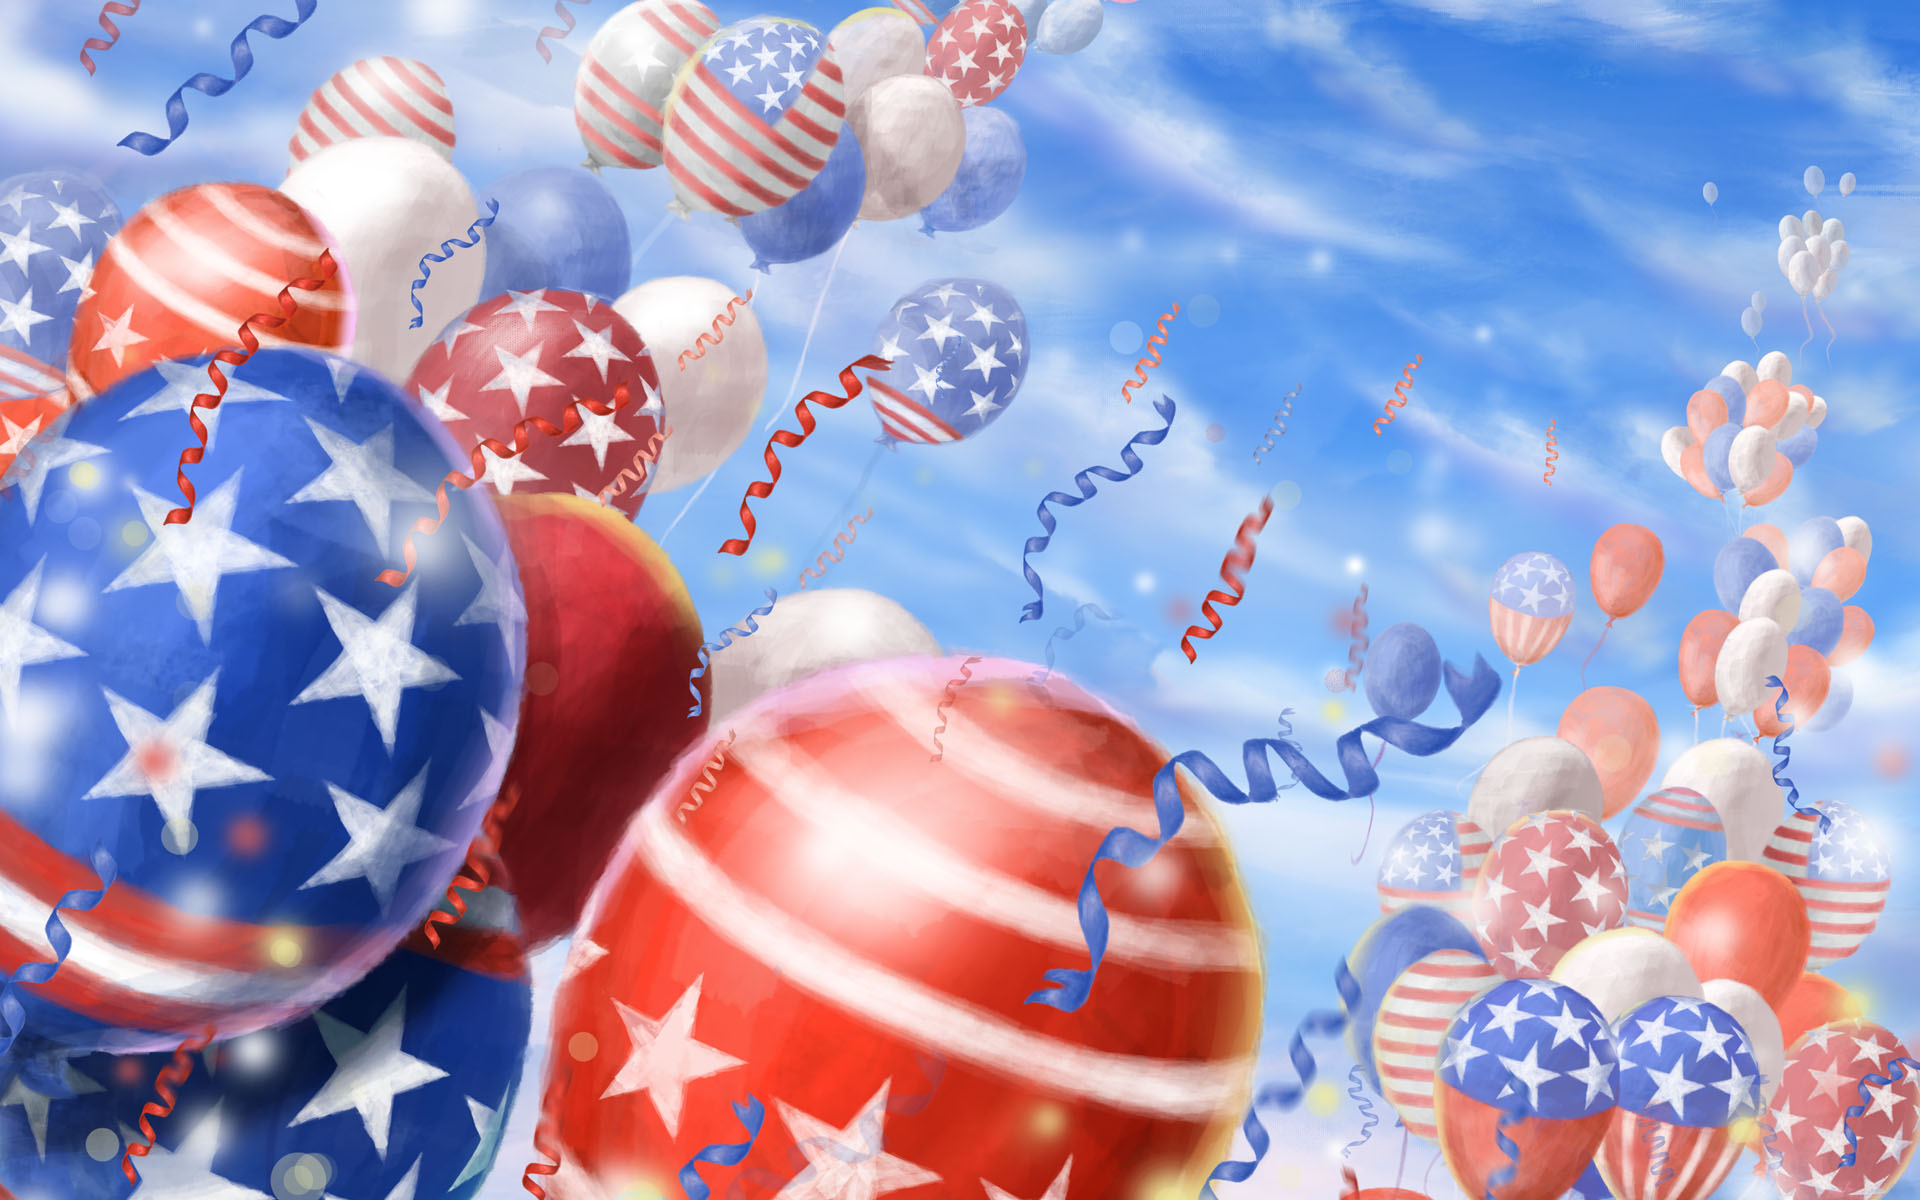 4 July Independence Day Usa Celebration Balloon Motifs Of American Flag  Desktop Hd Wallpaper Download For Mobile And Tablet 1920x1200 :  